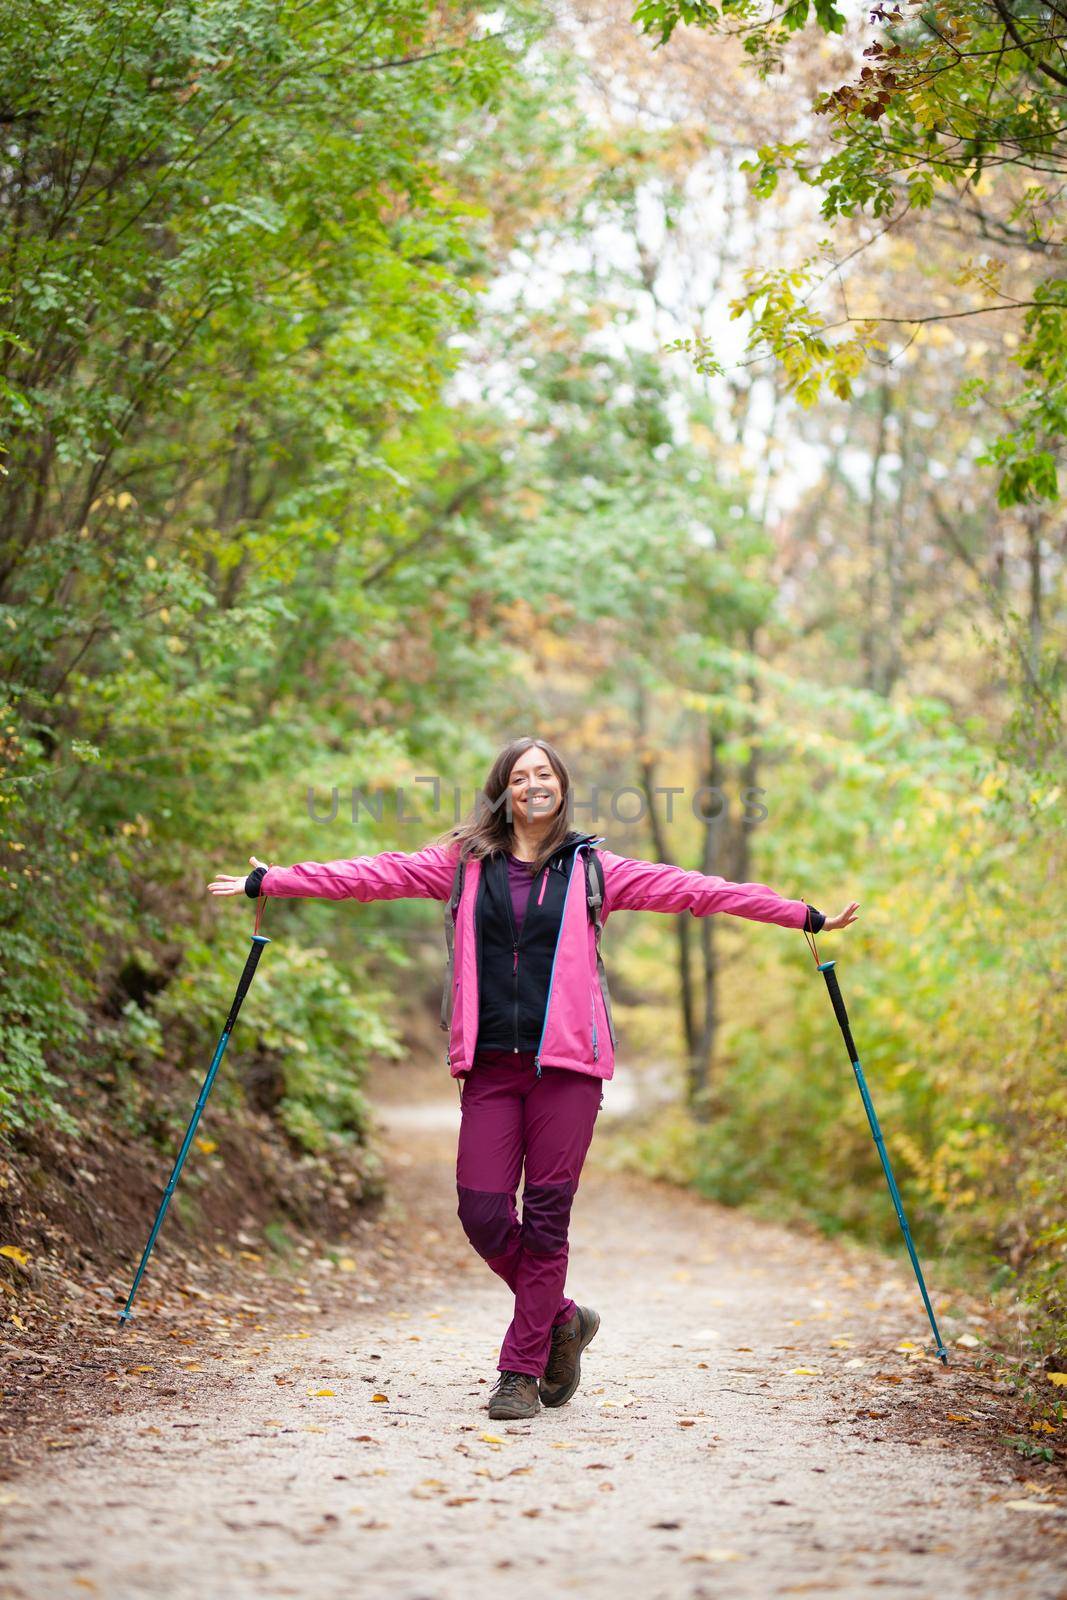 Hiker girl standing on a wide trail in the mountains. Backpacker with pink jacket in a forest. Healthy fitness lifestyle outdoors.